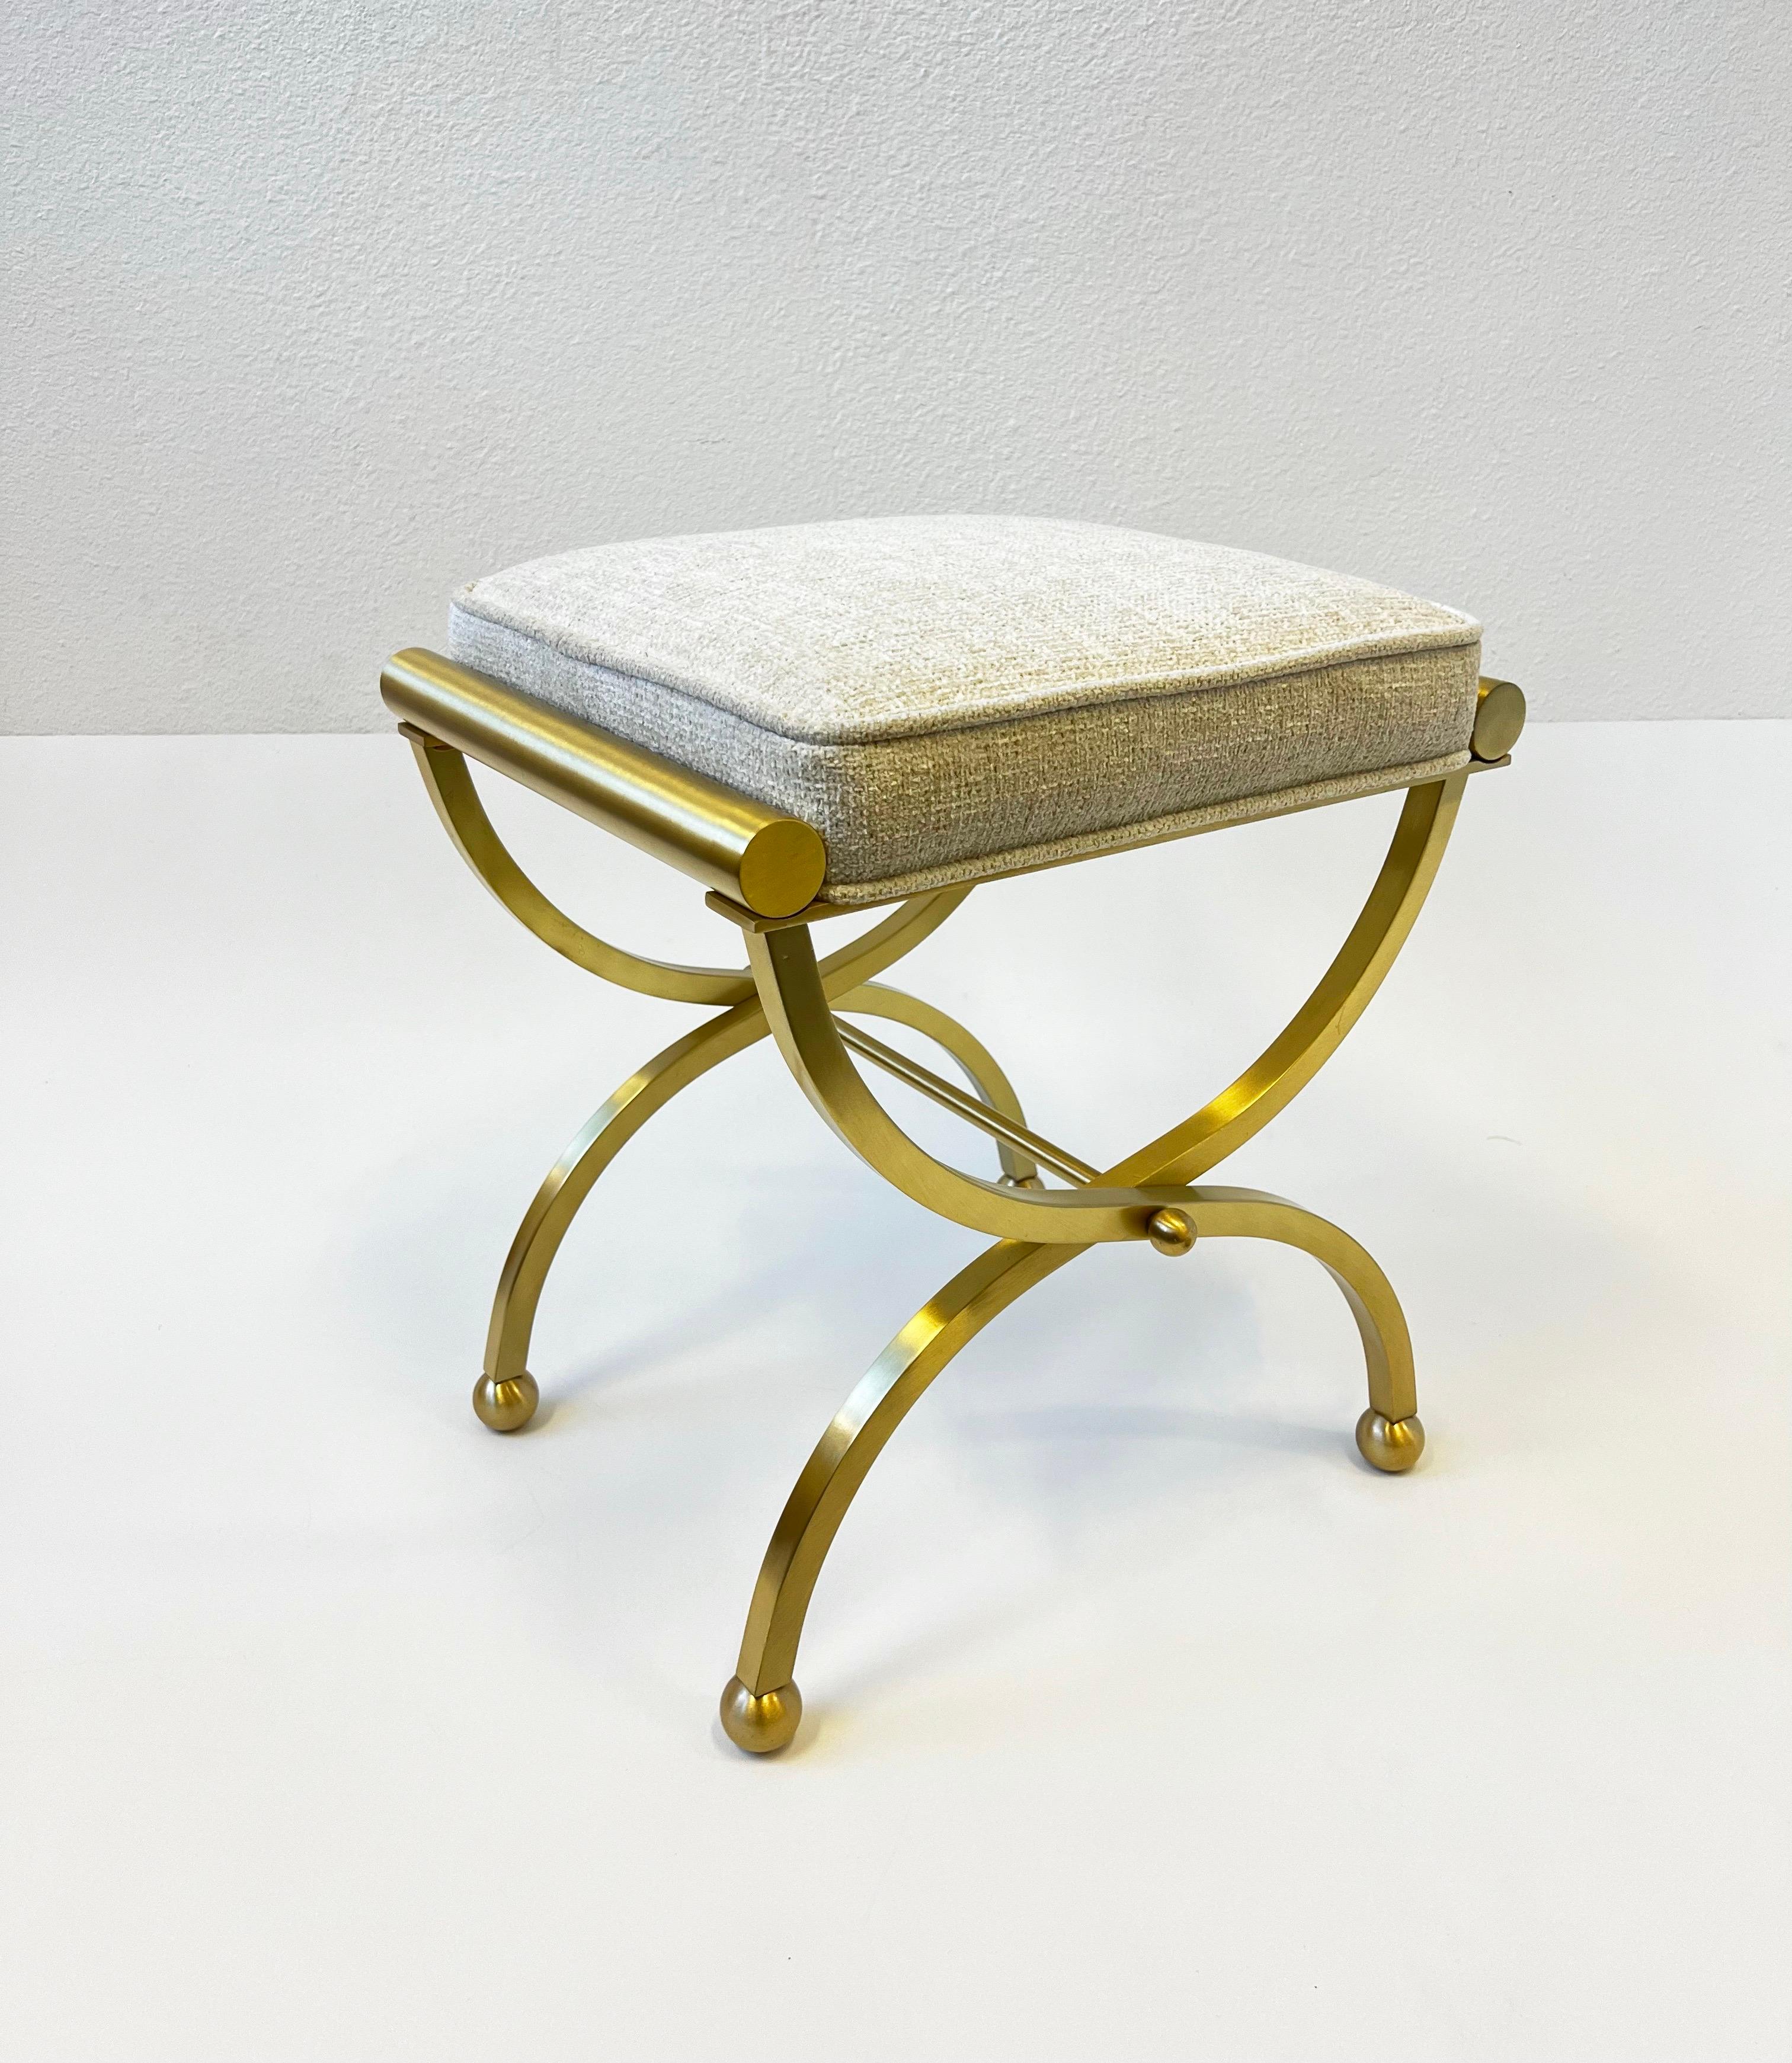 1970’s Glamorous brush brass vanity stool by American renowned designer Charles Hollis Jones for Hudson Rissman. 

Newly restored. It retains the original Hudson Rissman label and signature by CHJ.

Measurements: 
17.25” Wide, 15.5” Deep, 19” High. 